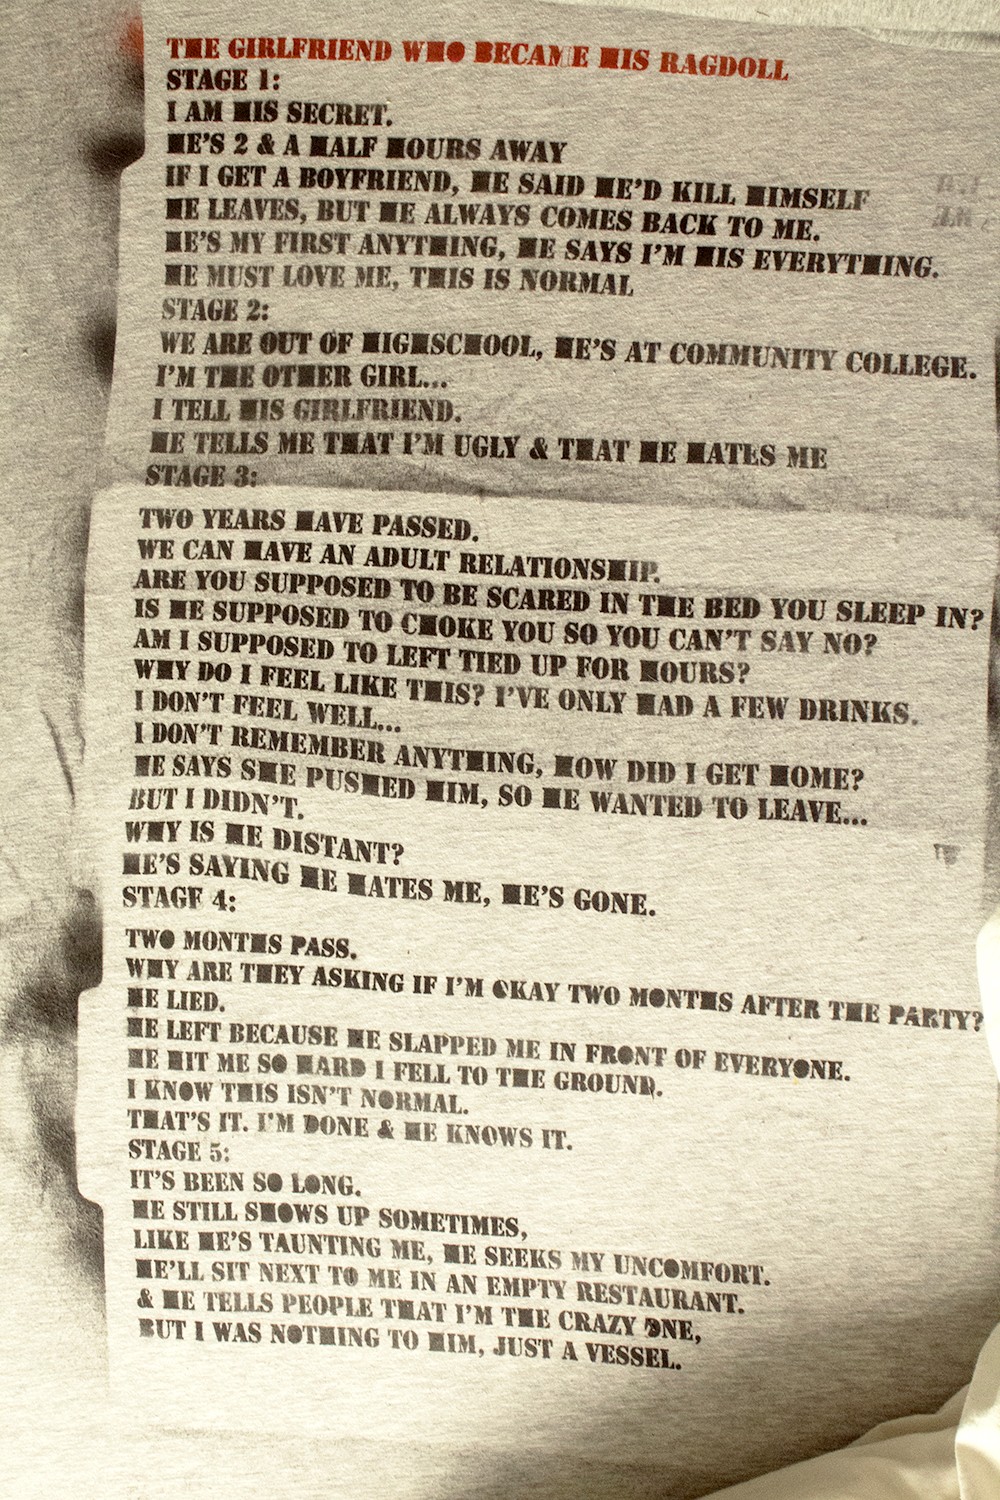 detail shot of poem stenciled on bedsheet: THE GIRLFRIEND WHO BECAME HIS RAGDOLL STAGE 1: I AM HIS SECRET. HE’S 2 & A HALF HOURS AWAY IF I GET A BOYFRIEND, HE SAID HE’D KILL HIMSELF HE LEAVES, BUT HE ALWAYS COMES BACK TO ME. HE’S MY FIRST ANYTHING, HE SAYS I’M HIS EVERYTHING. HE MUST LOVE ME, THIS IS NORMAL STAGE 2: WE ARE OUT OF HIGHSCHOOL, HE’S AT COMMUNITY COLLEGE. I’M THE OTHER GIRL... I TELL HIS GIRLFRIEND. HE TELLS ME THAT I’M UGLY & THAT HE HATES ME STAGE 3: TWO YEARS HAVE PASSED. WE CAN HAVE AN ADULT RELATIONSHIP. ARE YOU SUPPOSED TO BE SCARED IN THE BED YOU SLEEP IN? IS HE SUPPOSED TO CHOKE YOU SO YOU CAN’T SAY NO? AM I SUPPOSED TO LEFT TIED UP FOR HOURS? WHY DO I FEEL LIKE THIS? I’VE ONLY HAD A FEW DRINKS. I DON’T FEEL WELL… I DON’T REMEMBER ANYTHING, HOW DID I GET HOME? HE SAYS SHE PUSHED HIM, SO HE WANTED TO LEAVE… BUT I DIDN’T. WHY IS HE DISTANT? HE’S SAYING HE HATES ME, HE’S GONE. STAGE 4: TWO MONTHS PASS.  WHY ARE THEY ASKING IF I’M OKAY TWO MONTHS AFTER THE PARTY? HE LIED. HE LEFT BECAUSE HE SLAPPED ME IN FRONT OF EVERYONE. HE HIT ME SO HARD I FELL TO THE GROUND. I KNOW THIS ISN’T NORMAL. THAT’S IT. I’M DONE & HE KNOWS IT. STAGE 5: IT’S BEEN SO LONG. HE STILL SHOWS UP SOMETIMES, LIKE HE’S TAUNTING ME, HE SEEKS MY UNCOMFORT. HE’LL SIT NEXT TO ME IN AN EMPTY RESTAURANT. & HE TELLS PEOPLE THAT I’M THE CRAZY ONE, BUT I WAS NOTHING TO HIM, JUST A VESSEL.